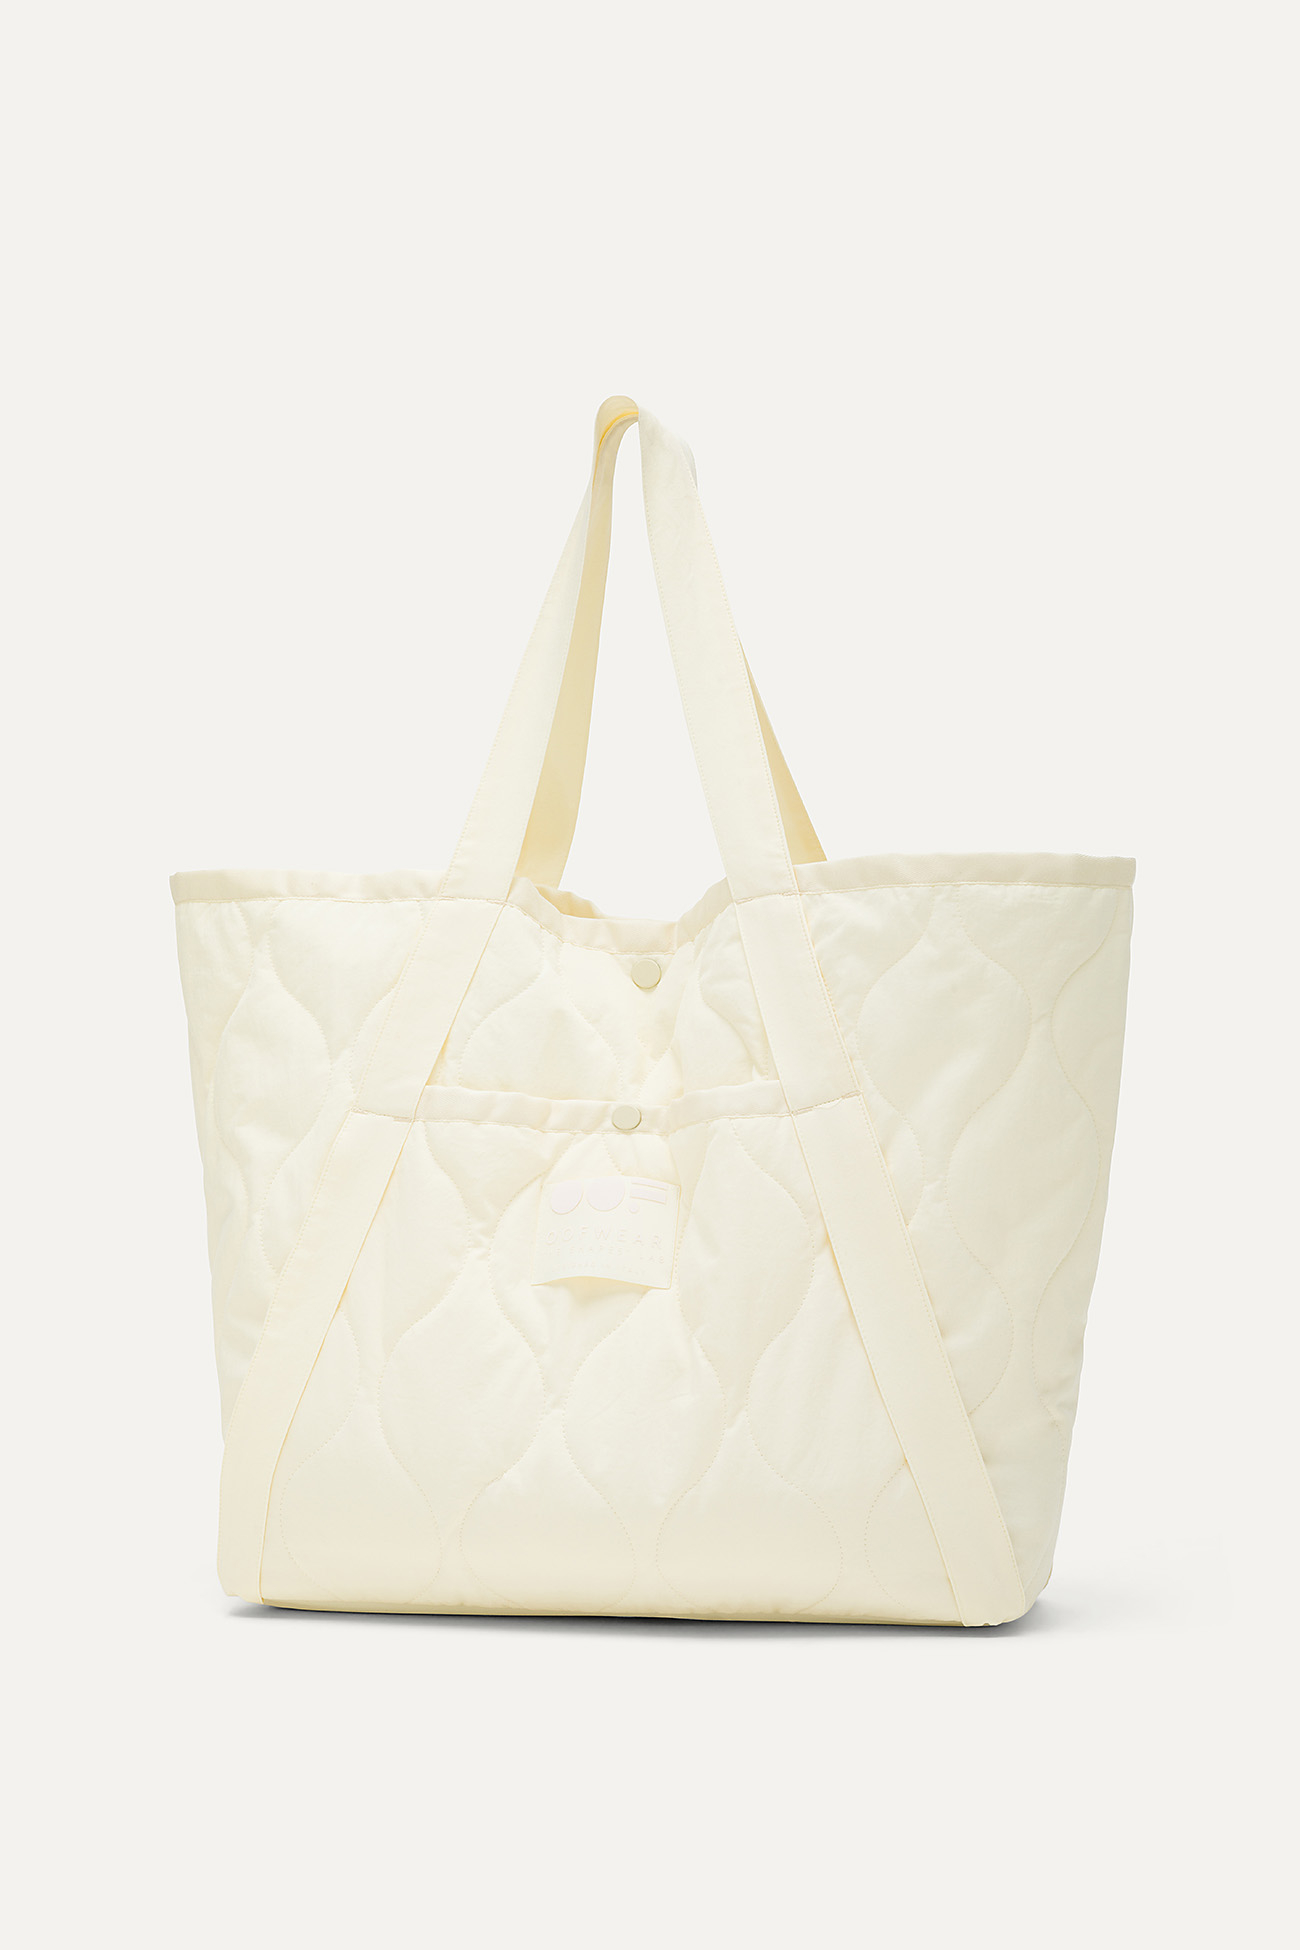 QUILTED COTTON SHOPPER BAG 3084 - VANILLA - OOF WEAR